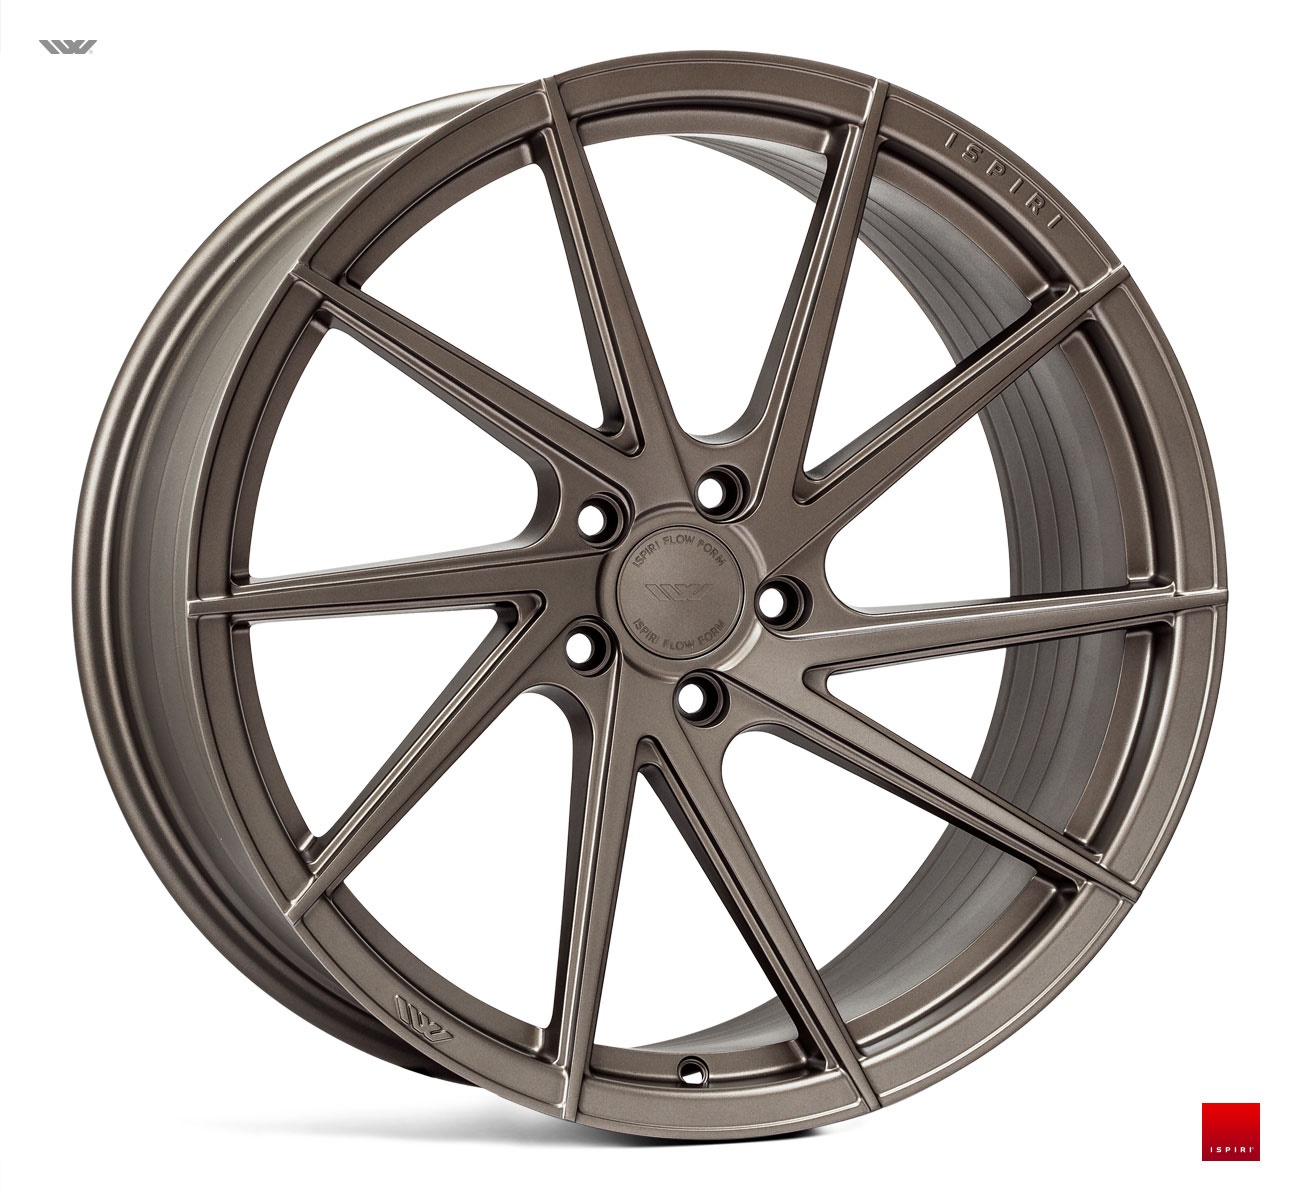 NEW 21" ISPIRI FFR1D DIRECTIONAL MULTI-SPOKE ALLOY WHEELS IN MATT CARBON BRONZE, DEEPER CONCAVE 10.5" REARS - VARIOUS FITMENTS AVAILABLE